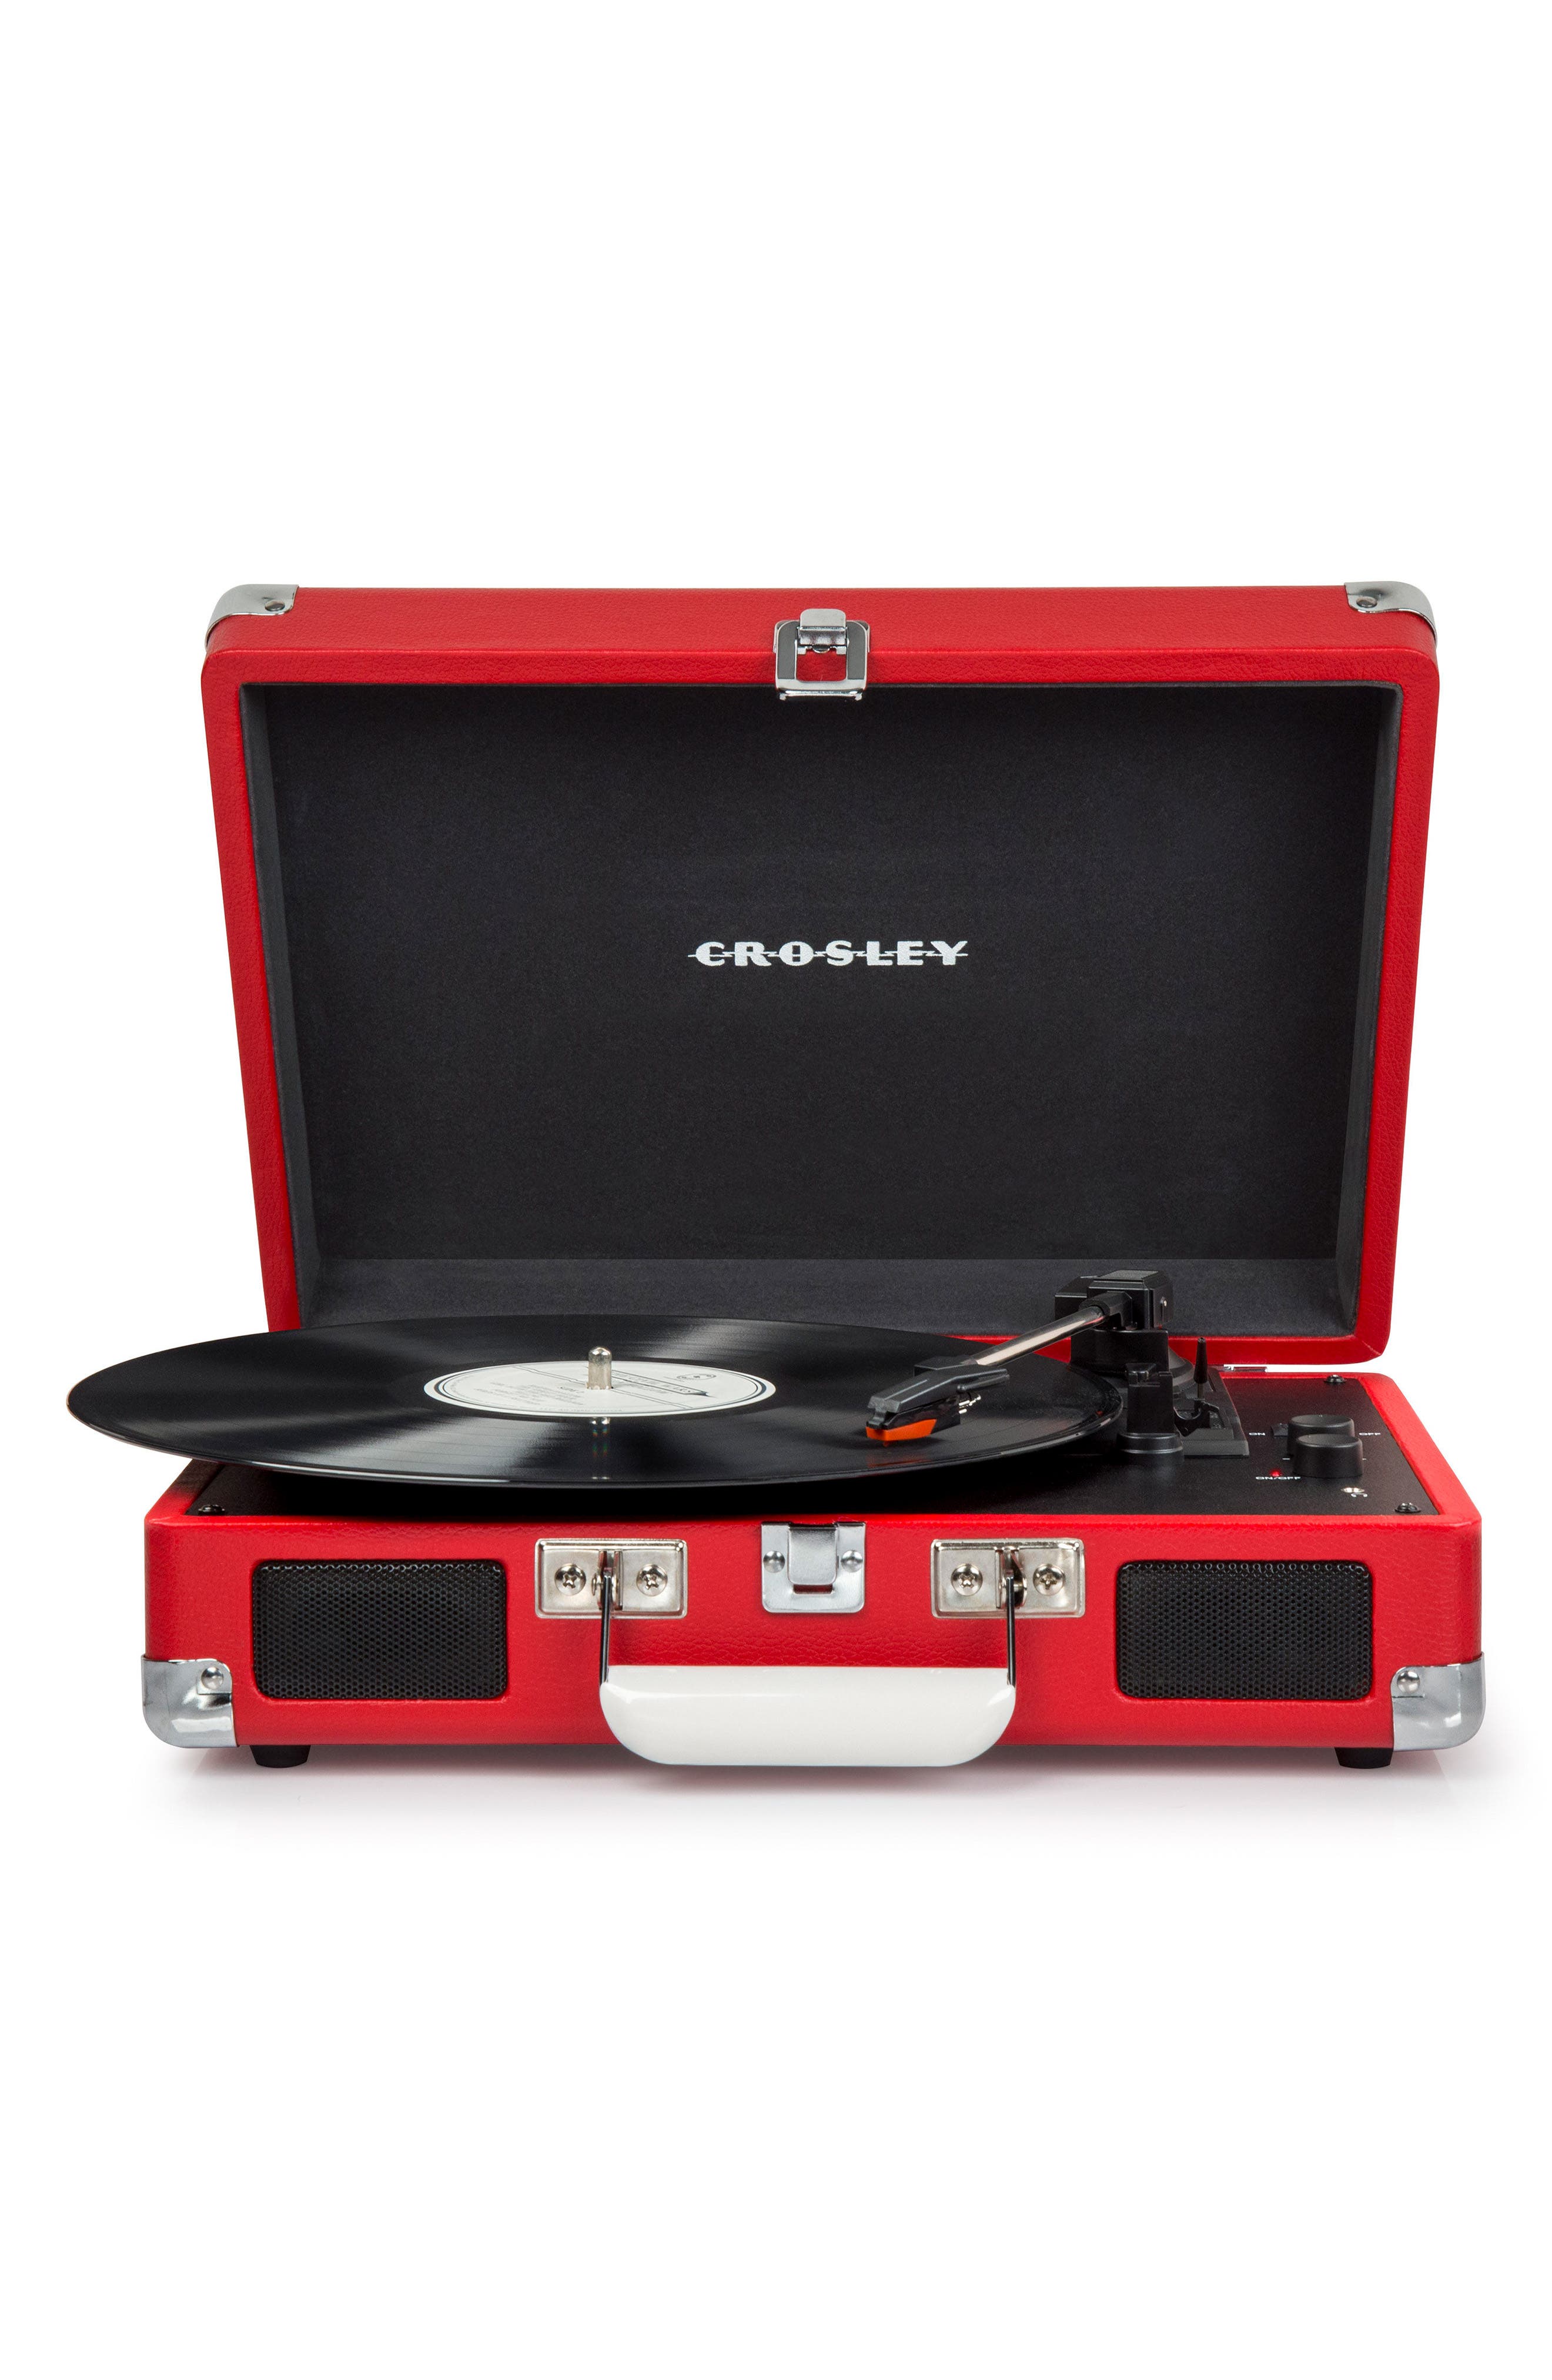 UPC 710244209403 product image for Crosley Radio Cruiser Deluxe Turntable, Size One Size - Red | upcitemdb.com